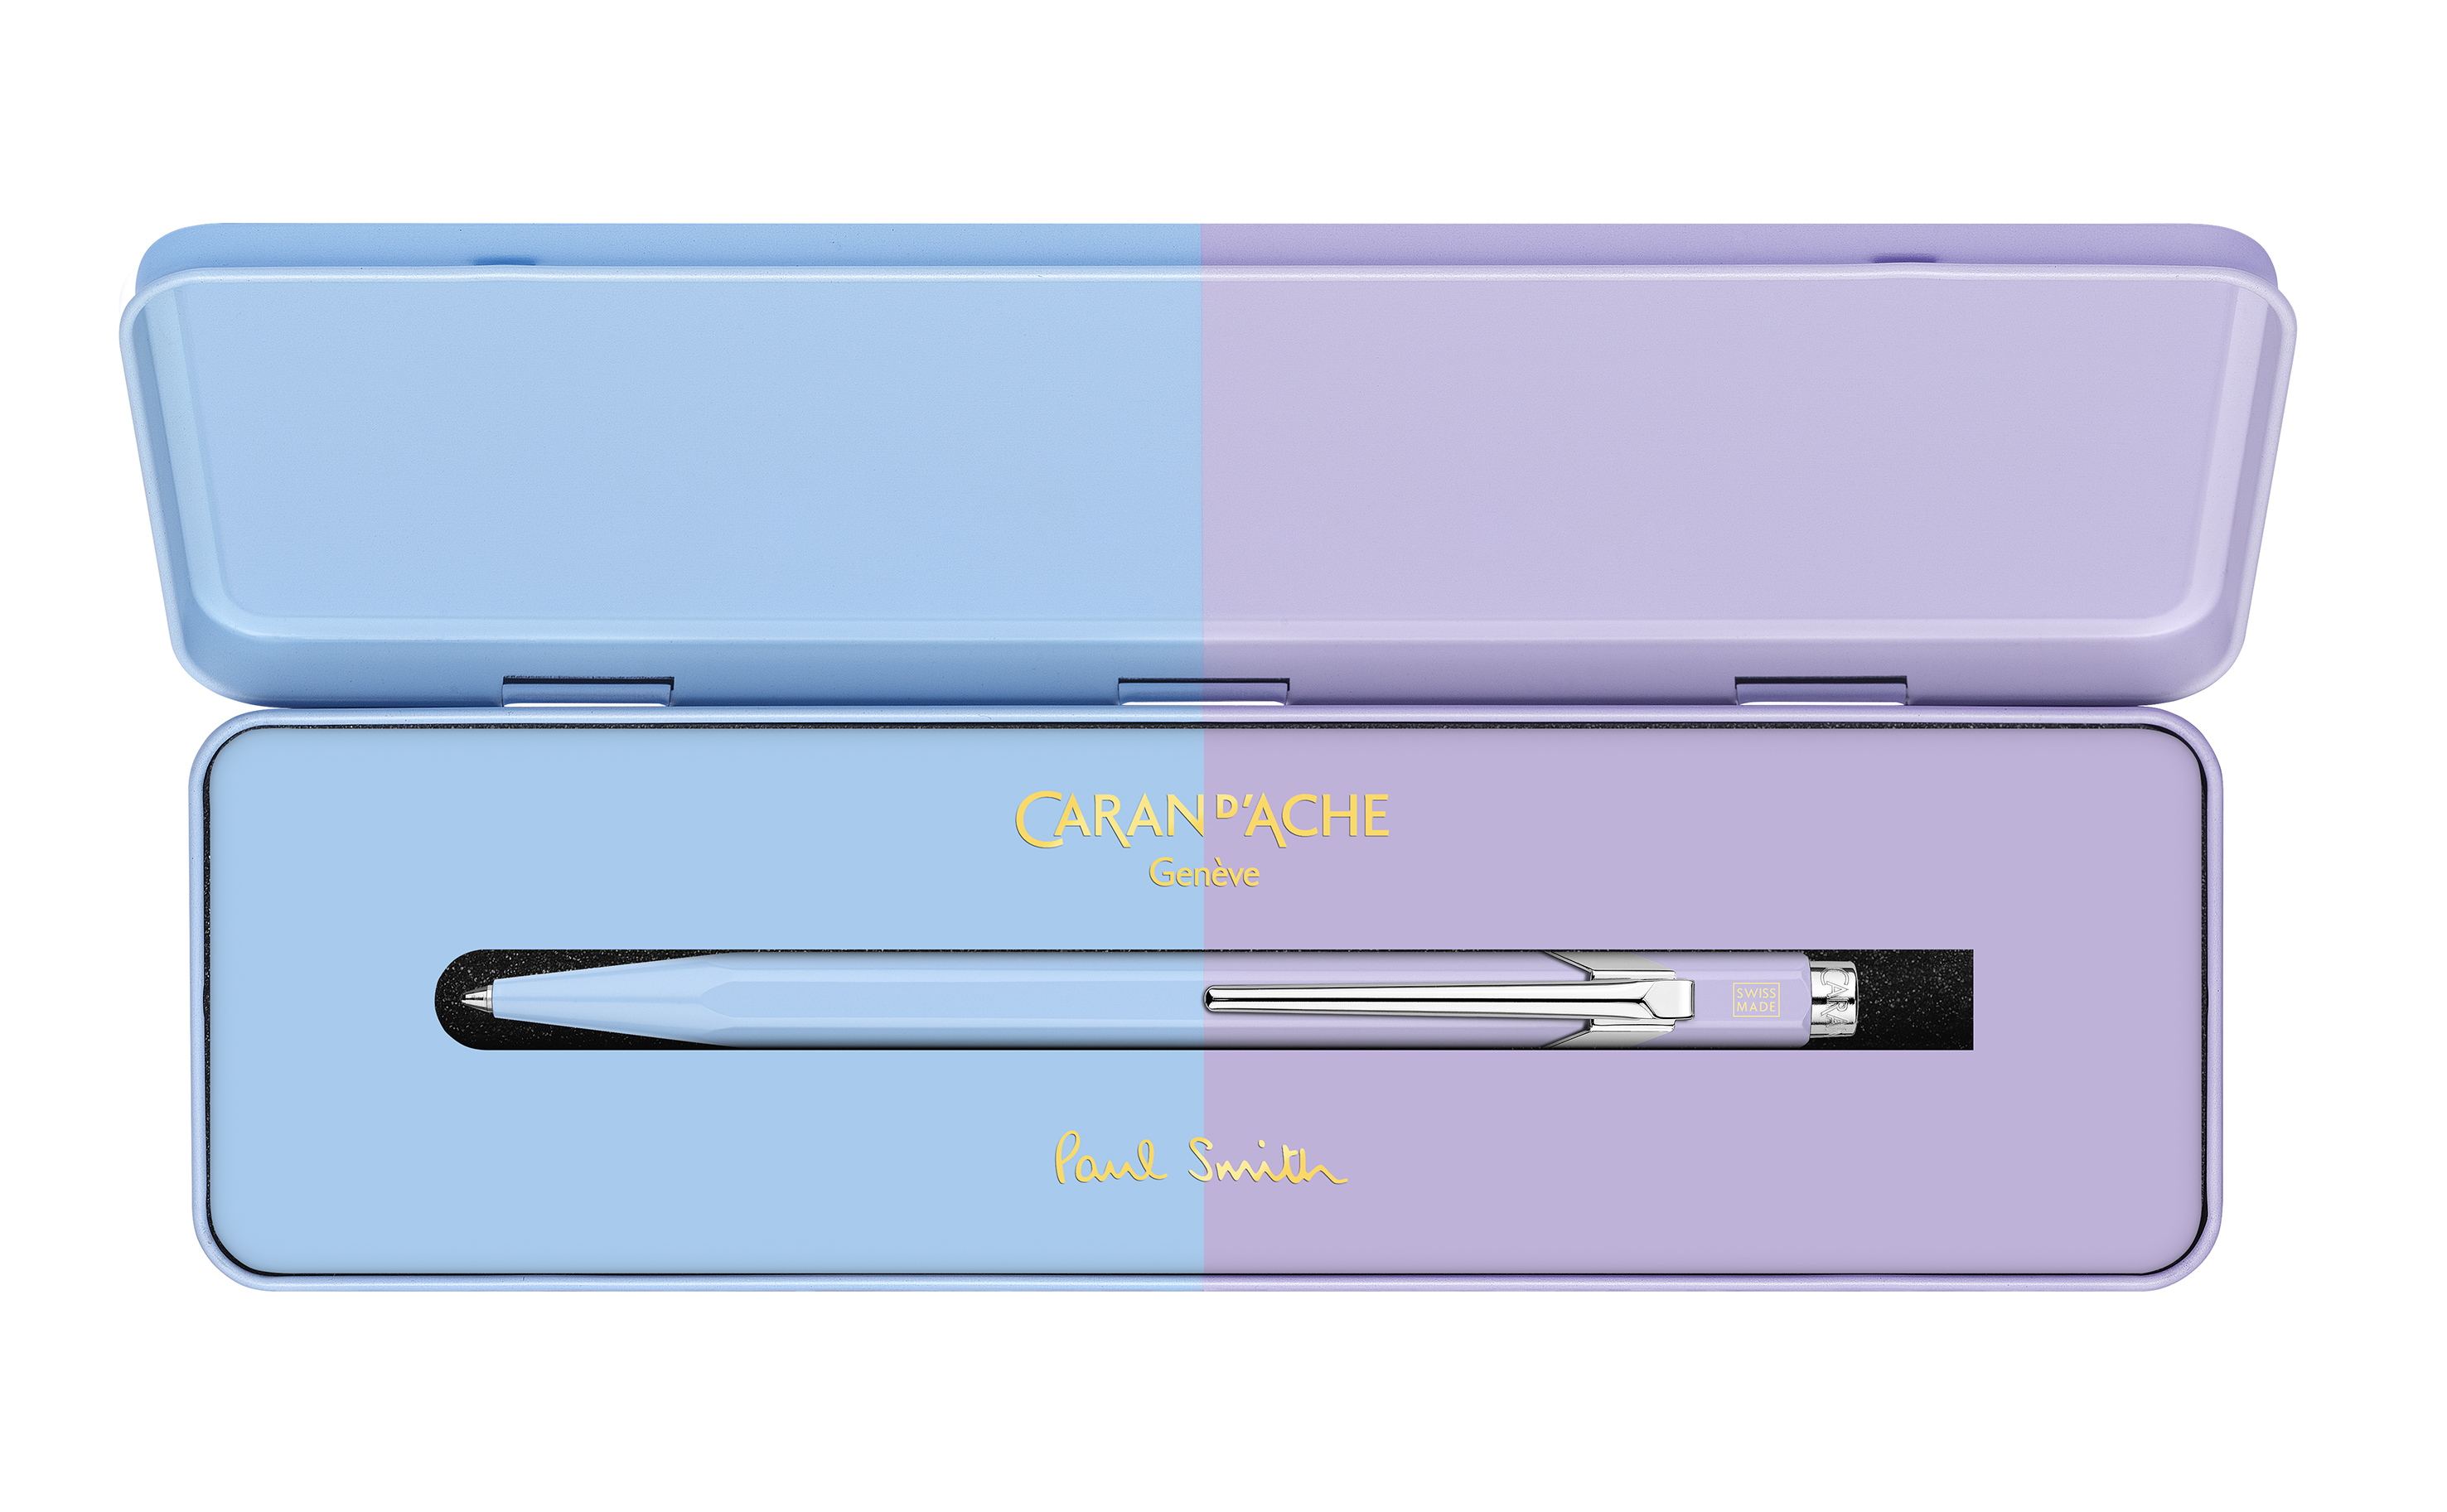 ballpoint pen 849 collaboration paul smith fourth edition colours skyblue and lavender in its metal case